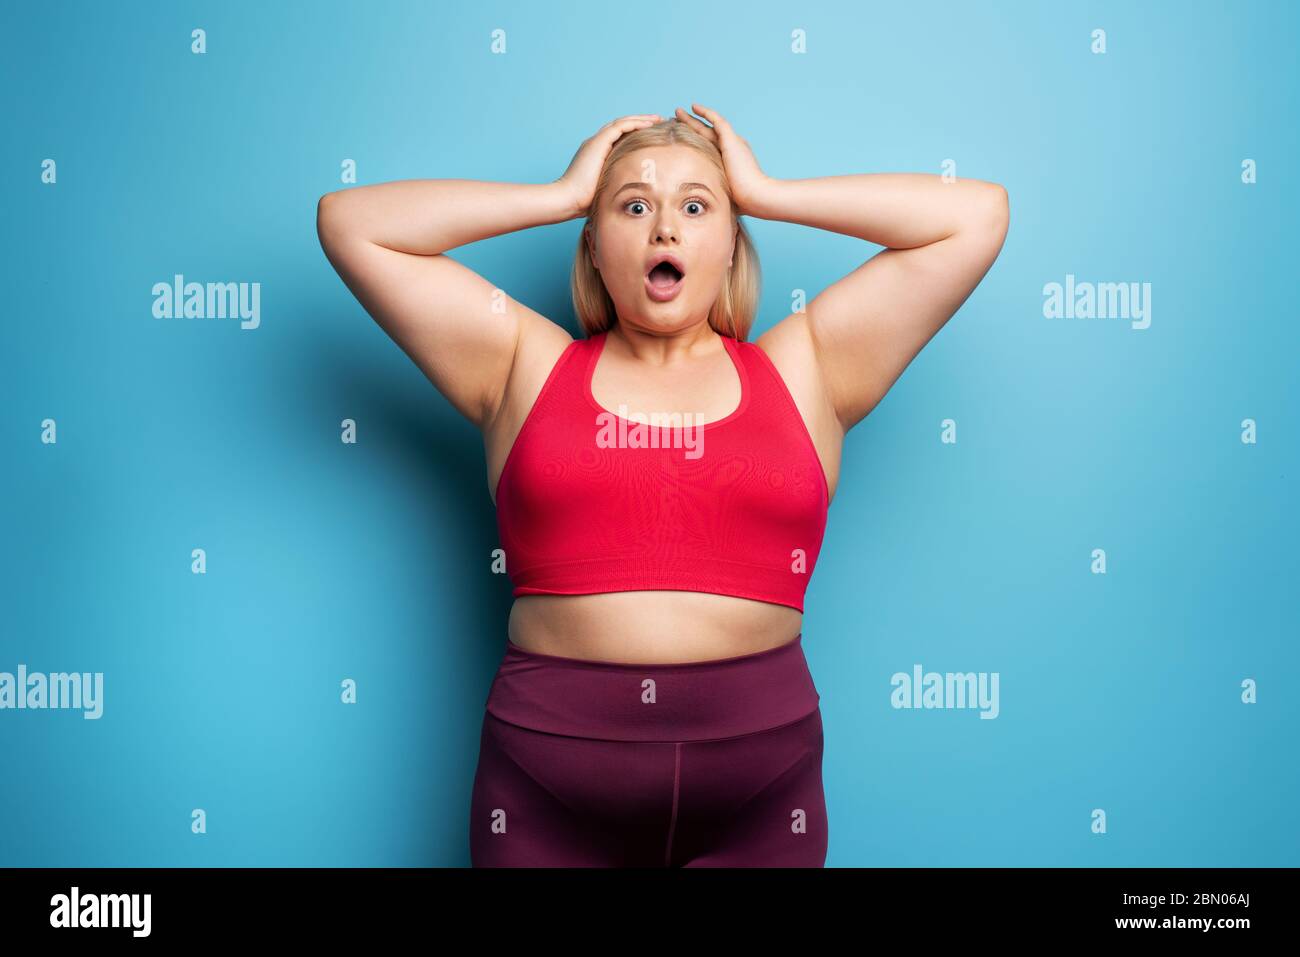 Fat girl is worried because the scale marks a high weight. Cyan background Stock Photo